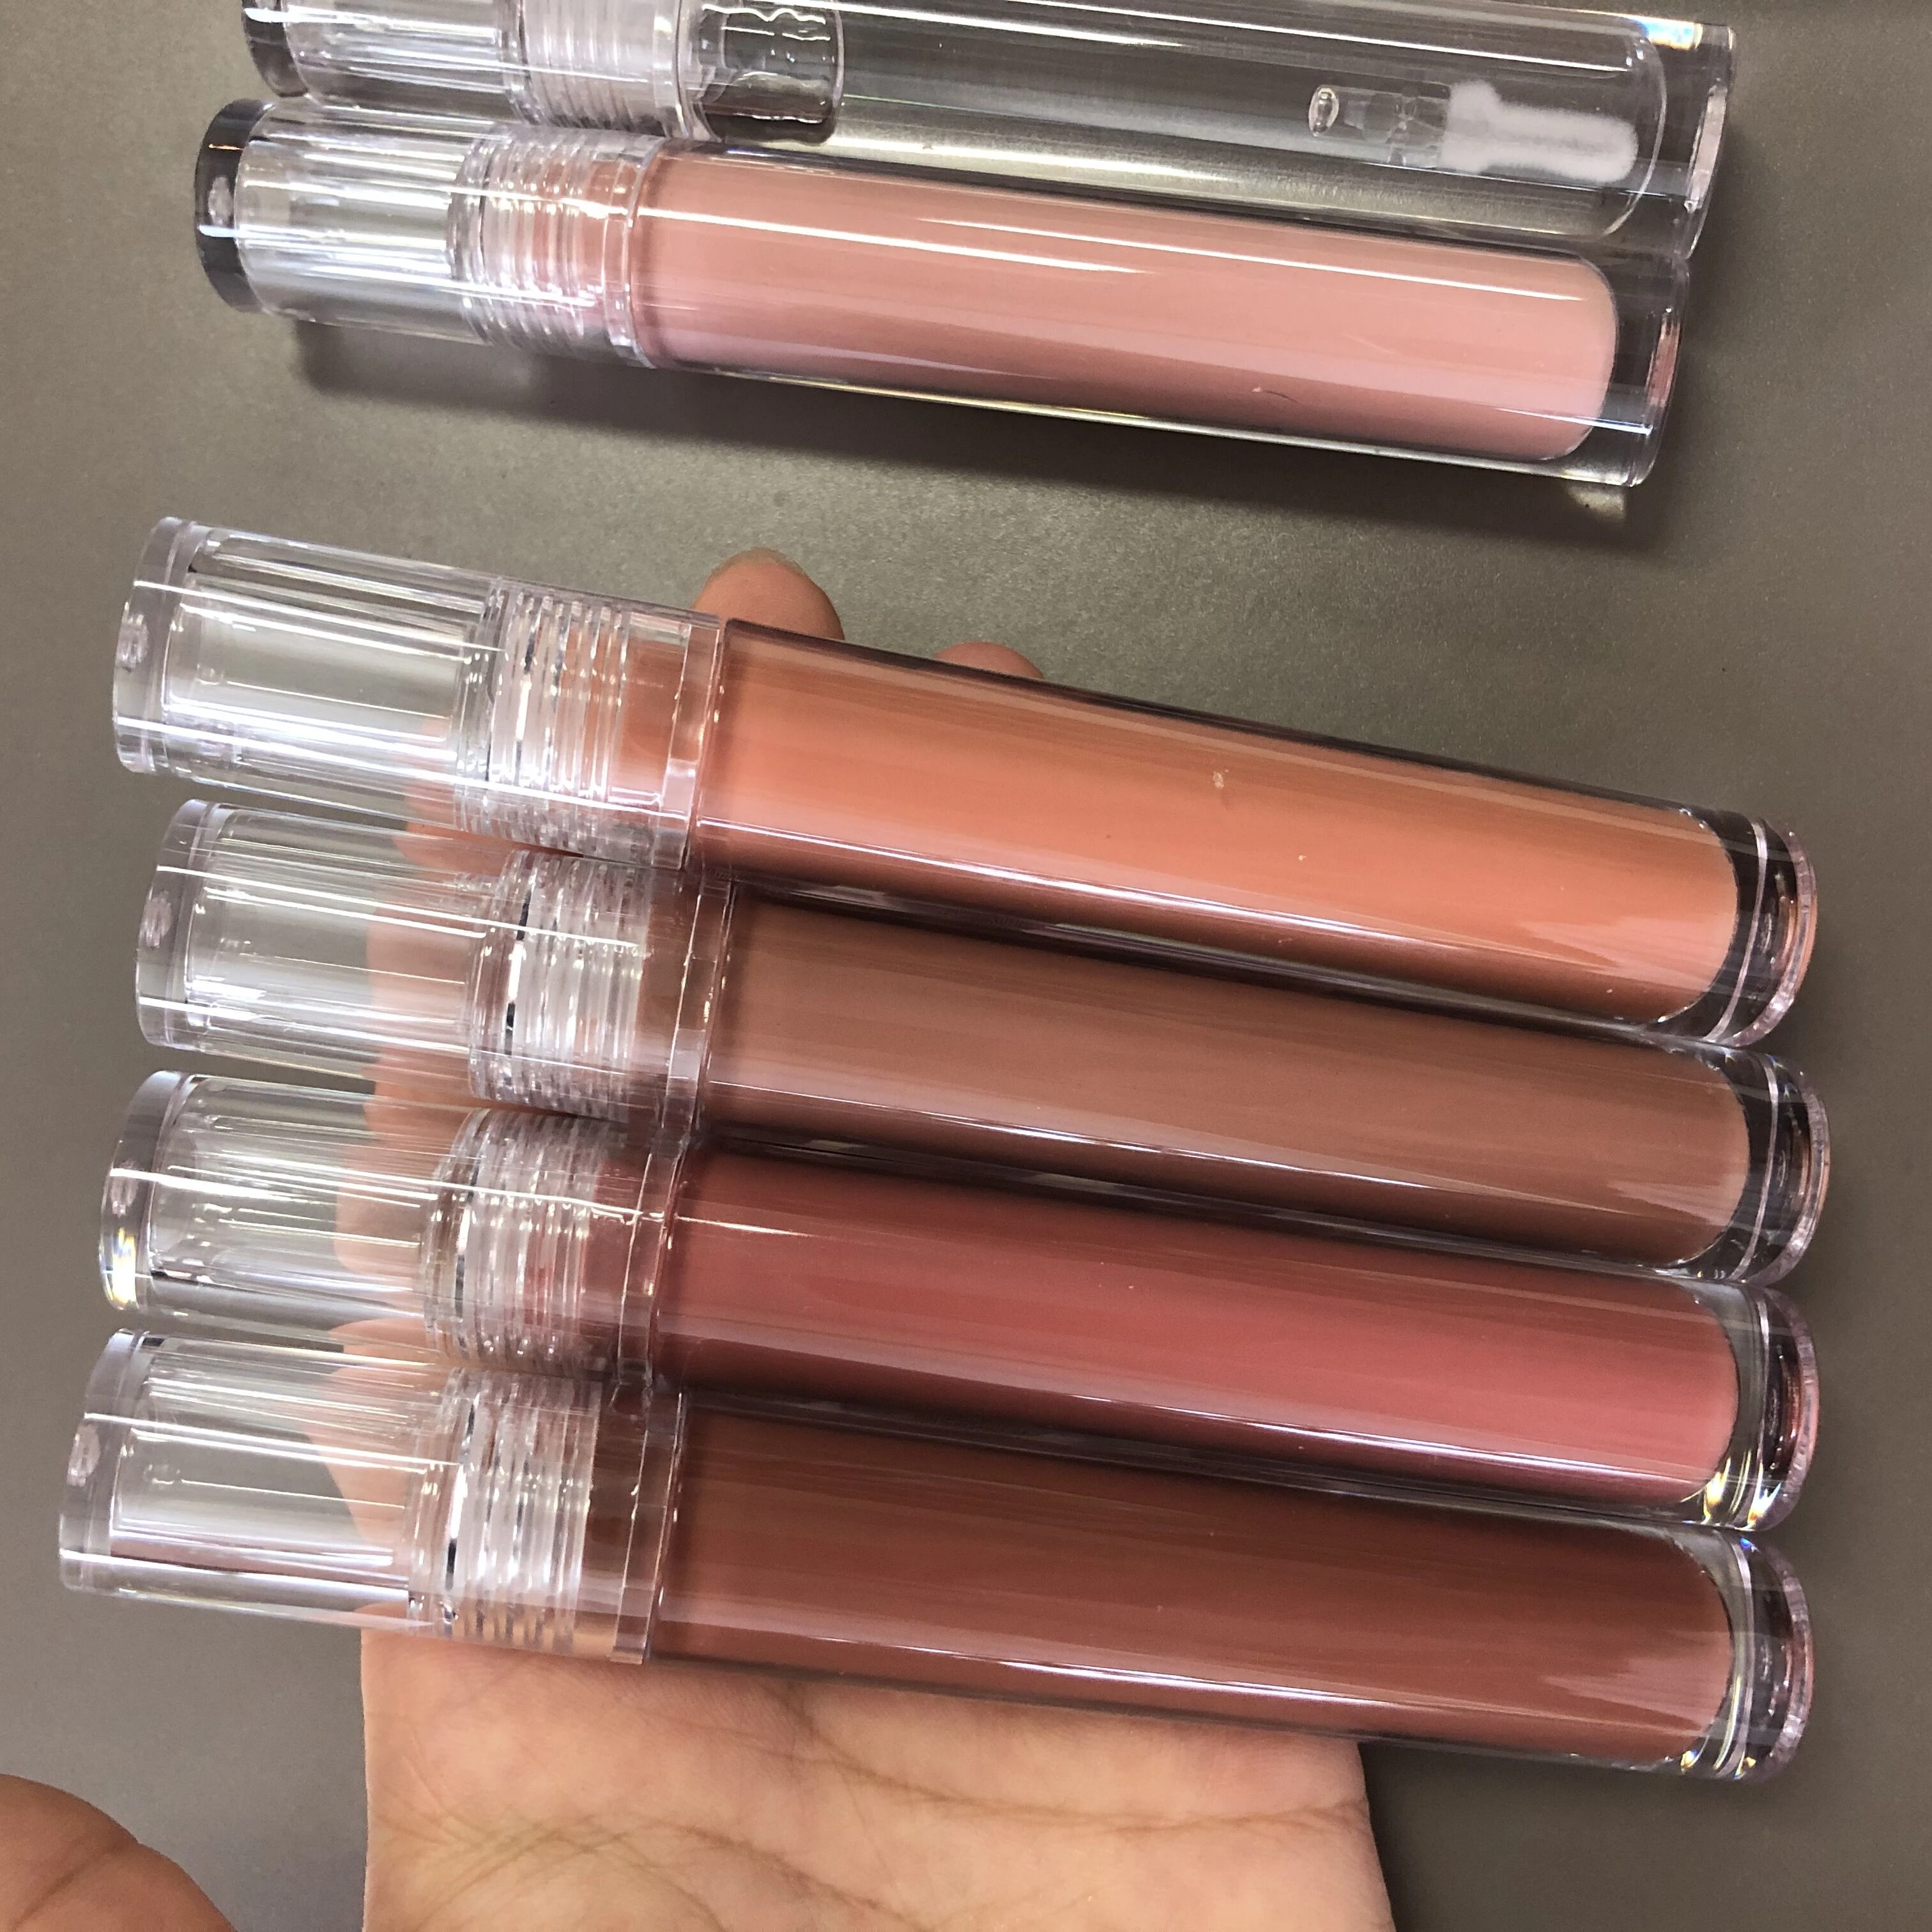 Moisture glossy colors brown nude lip gloss with private label